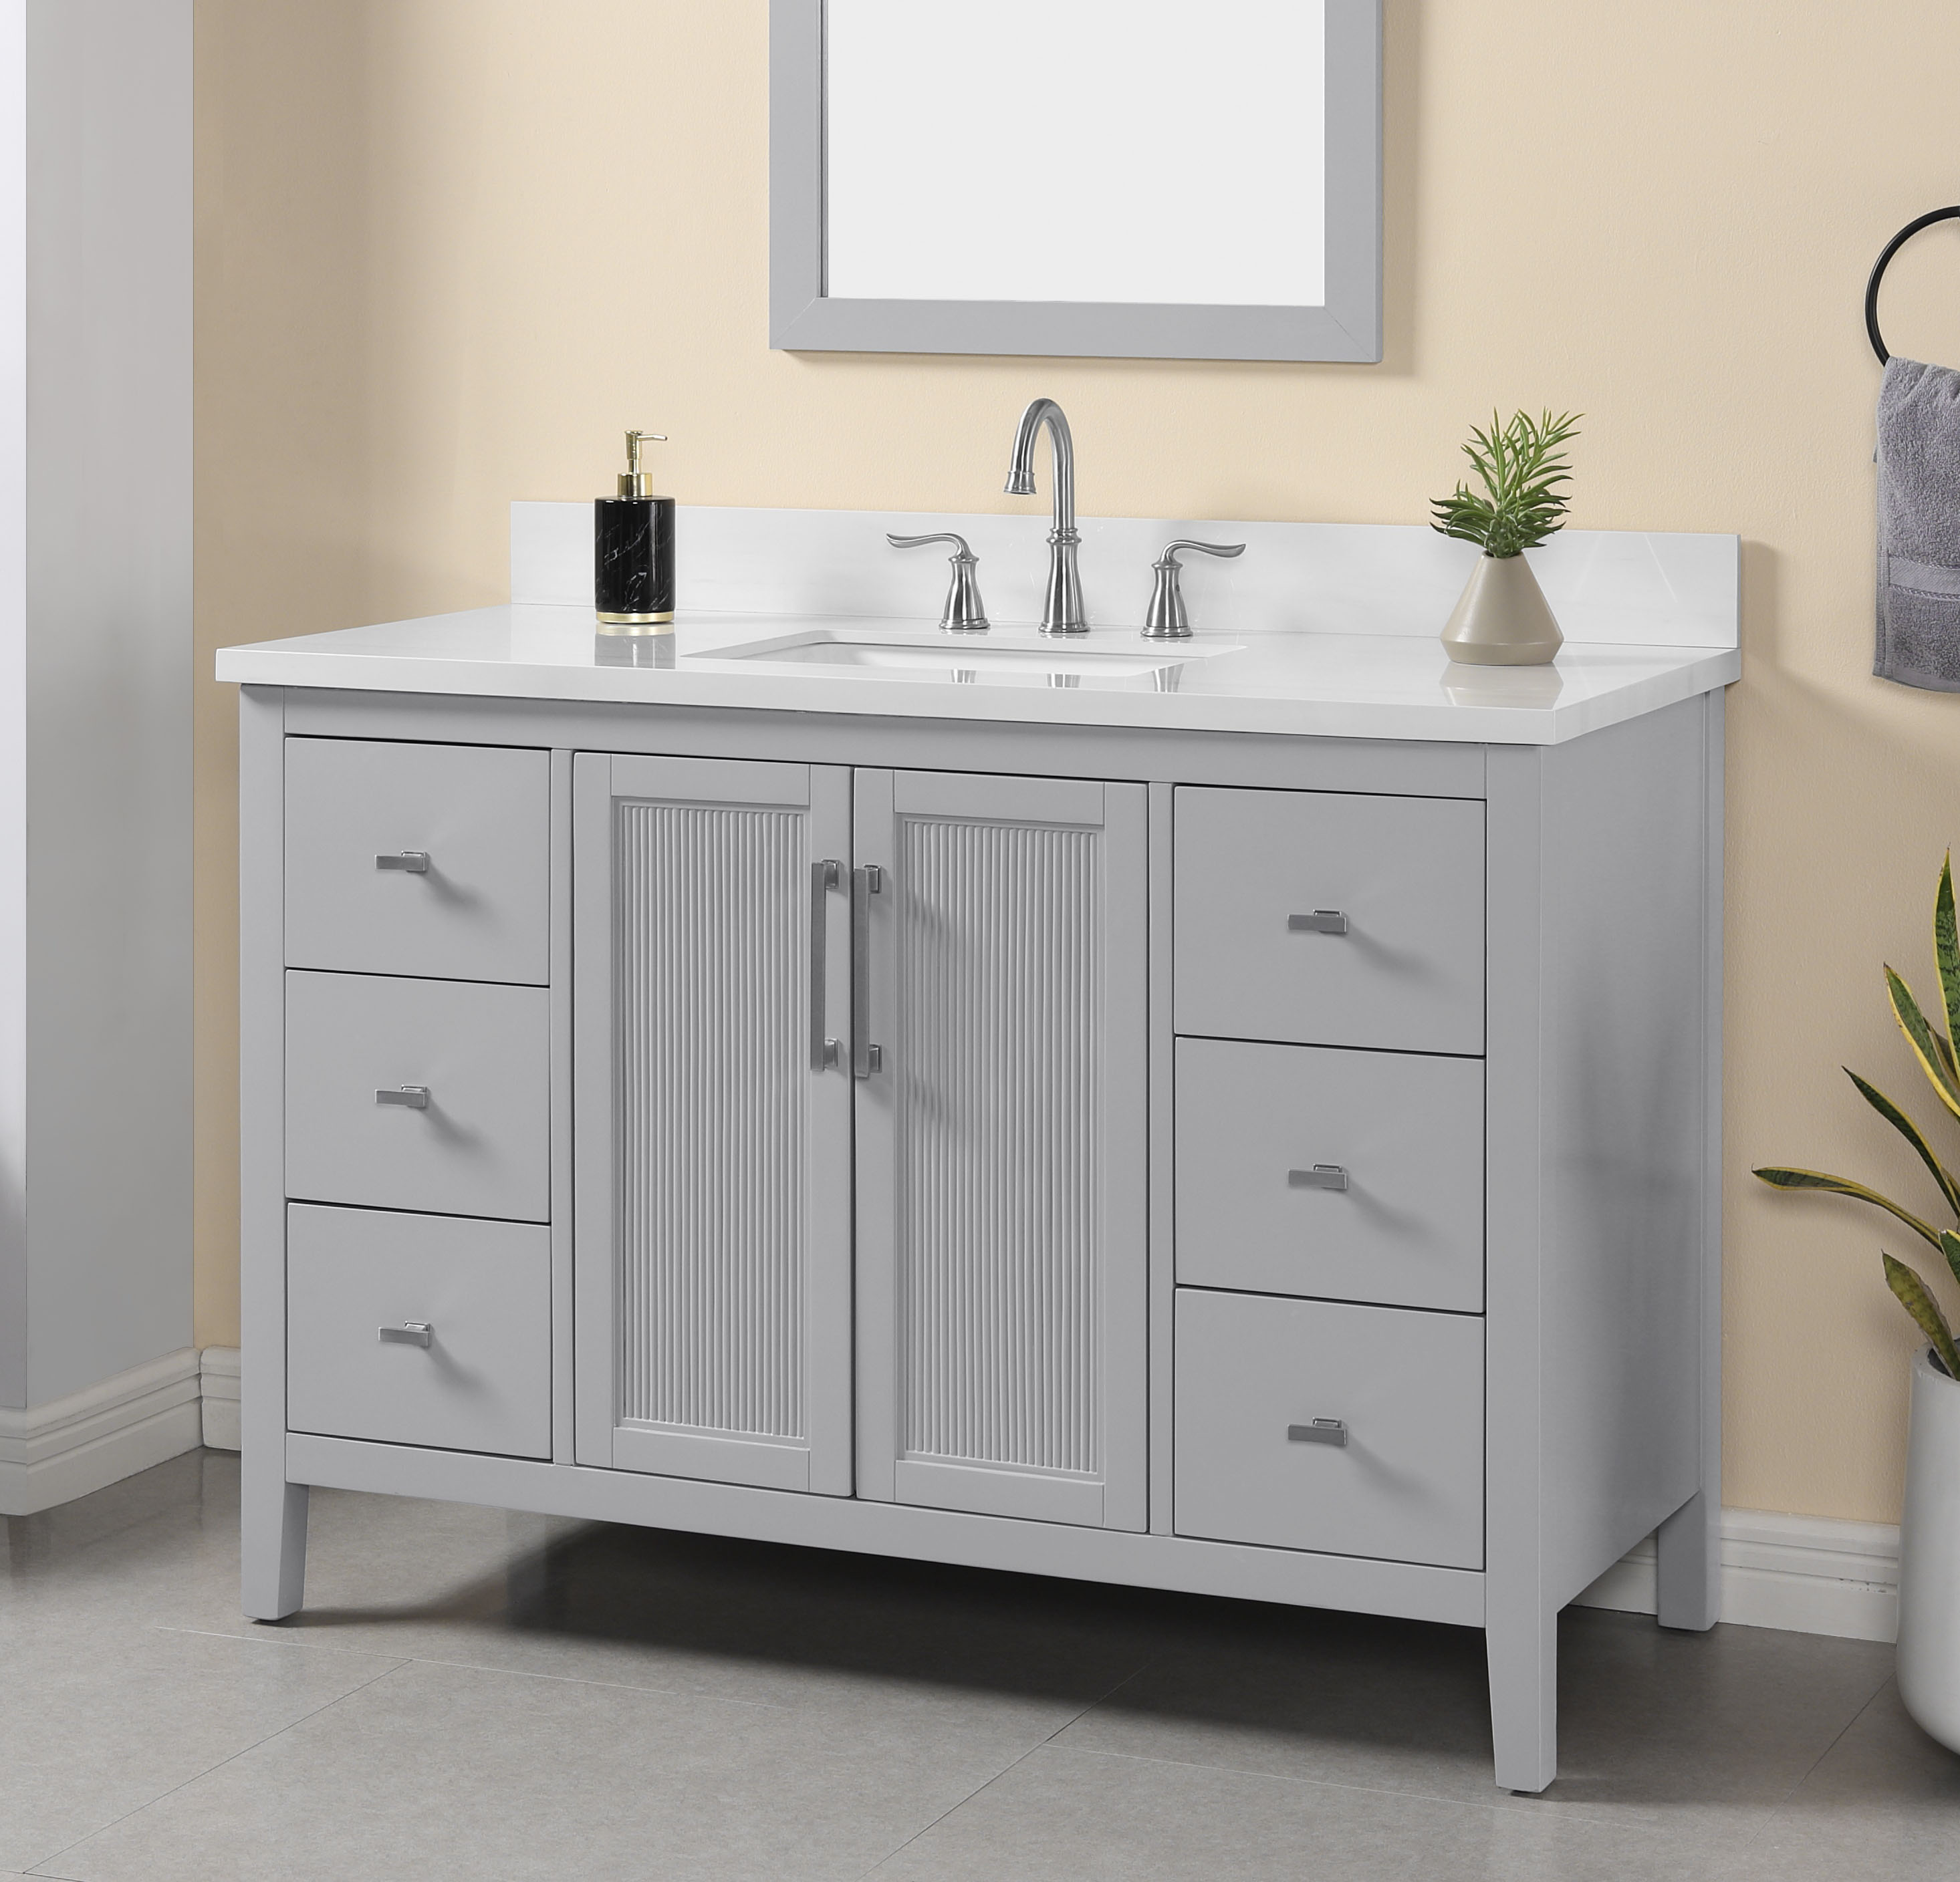 Hollister 48-in Vanity Combo in Light Gray with Sintered stone top